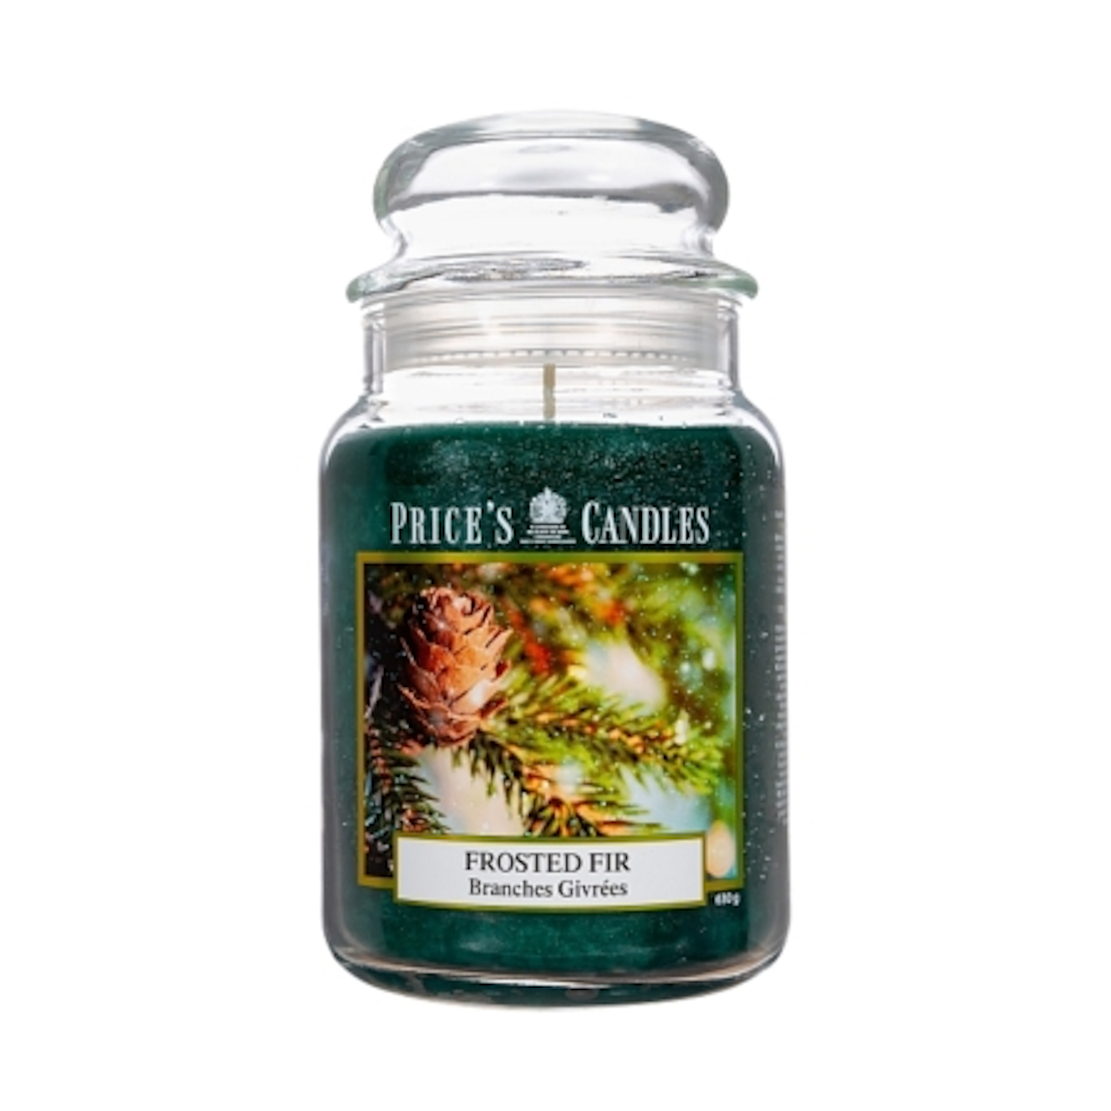 Prices Candles Frosted Fir Large Jar